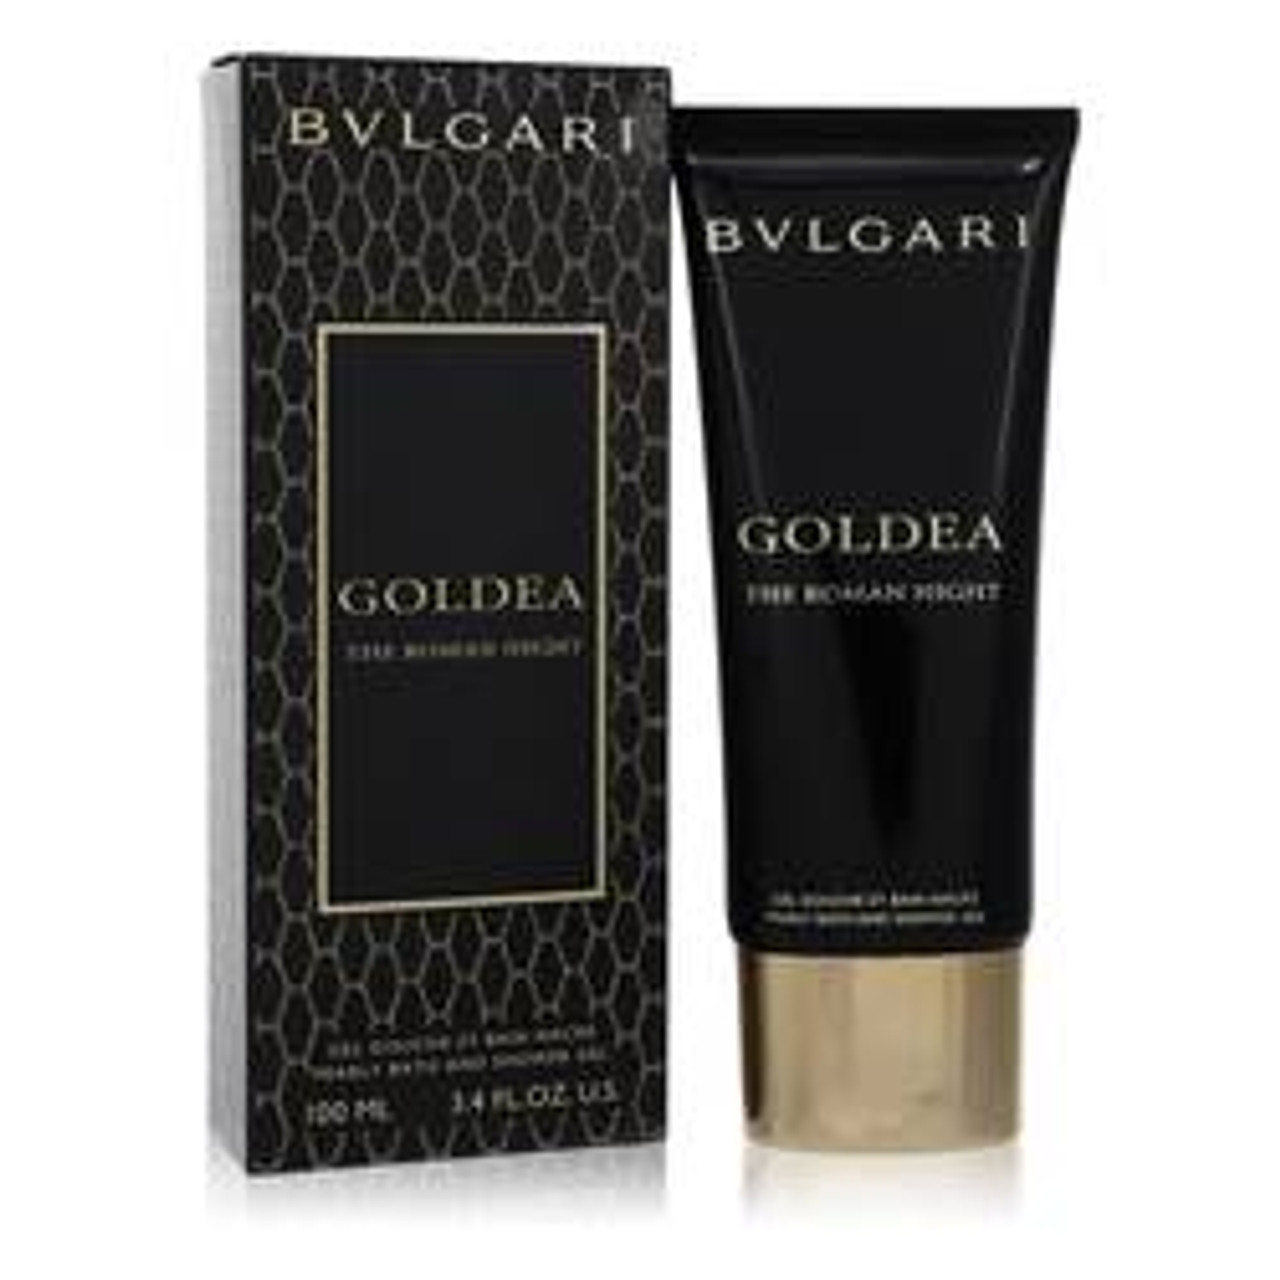 Bvlgari Goldea The Roman Night Perfume By Bvlgari Pearly Bath and Shower Gel 3.4 oz for Women - [From 75.00 - Choose pk Qty ] - *Ships from Miami